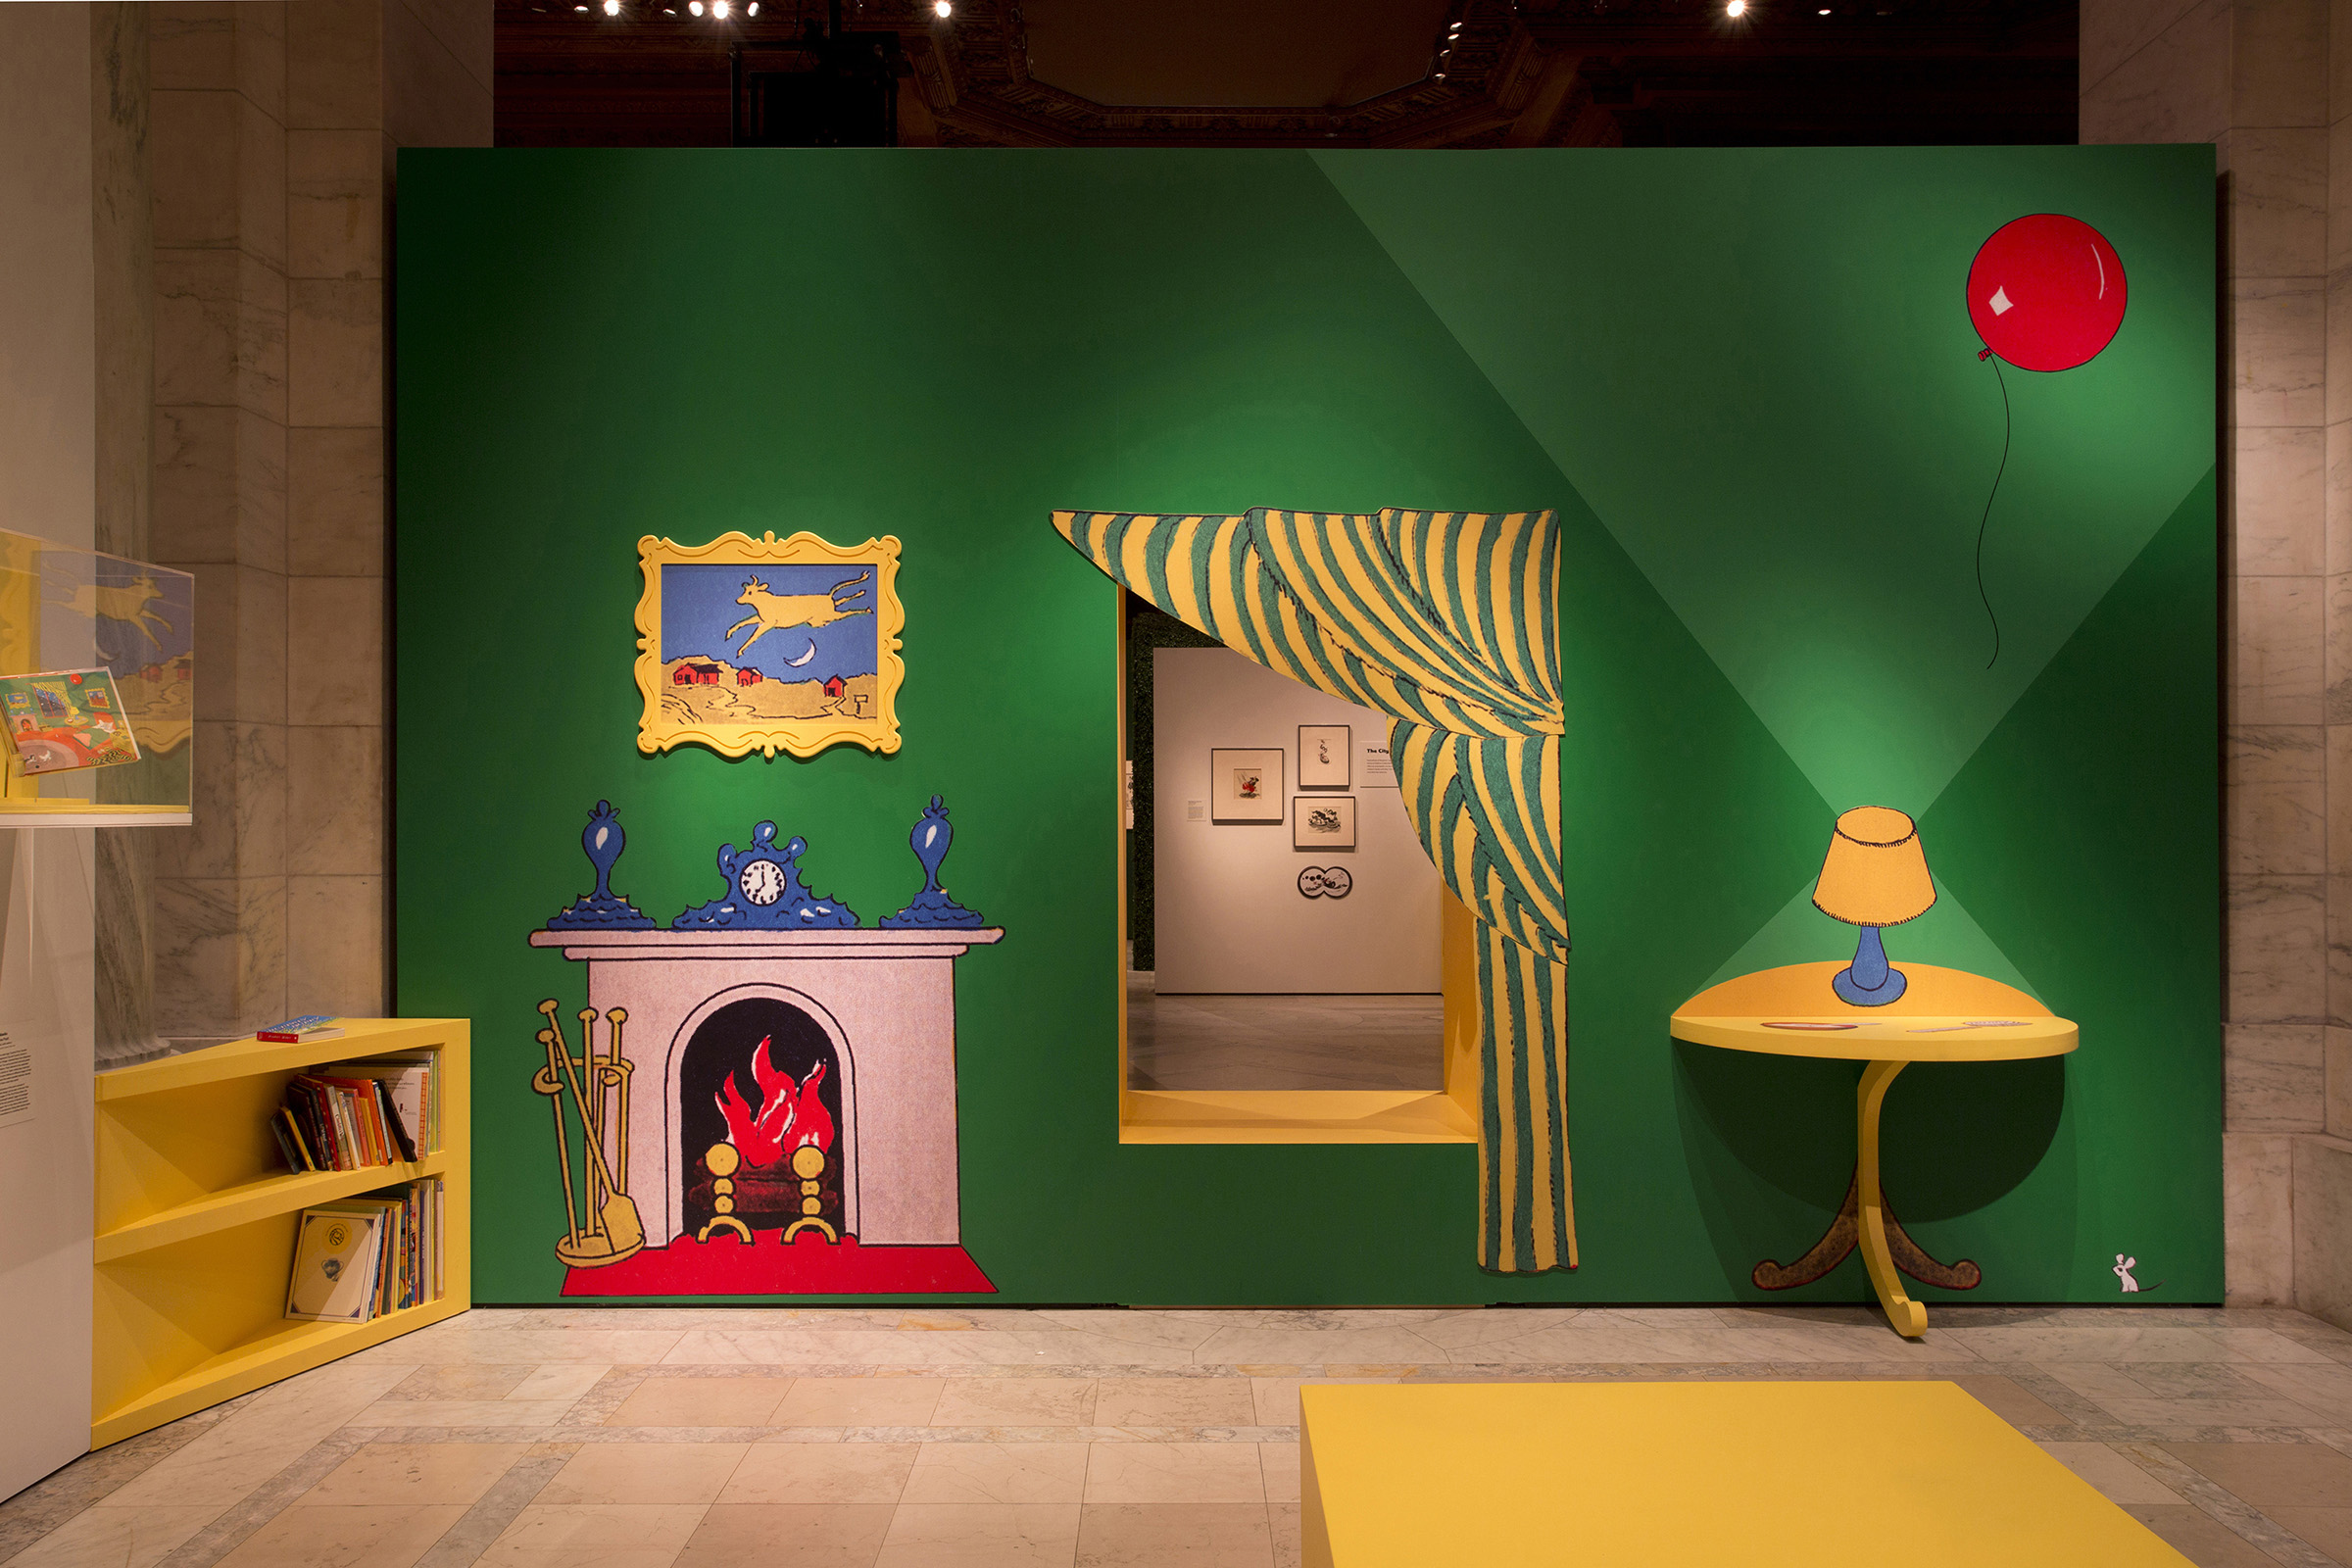 ABC of It. The Goodnight Moon room became a reading space. Visitors could take books from the shelf, sit on the window stool or low benches, and read.